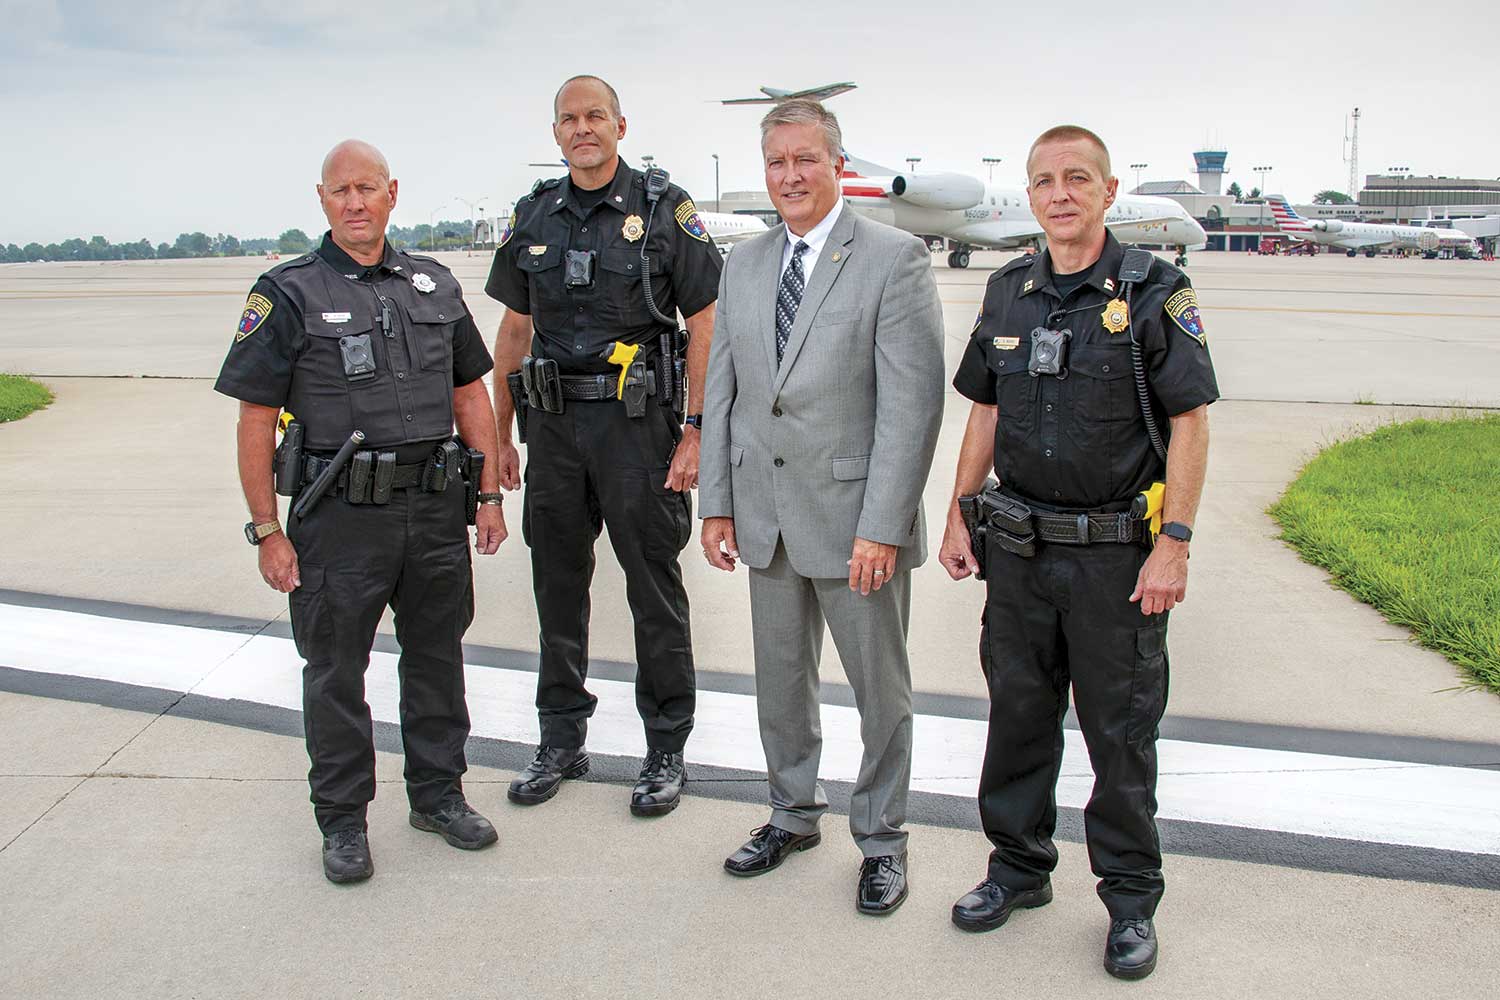  From left-to-right, Blue Grass Airport Public Safety Officer Ken Ridge, Assistant Chief Paul Pungratz, Pubic Safety Director Scott Lanter and Capt. Keith Moore pose on the flight line outside the public safety facility. (Photo by Jim Robertson) 